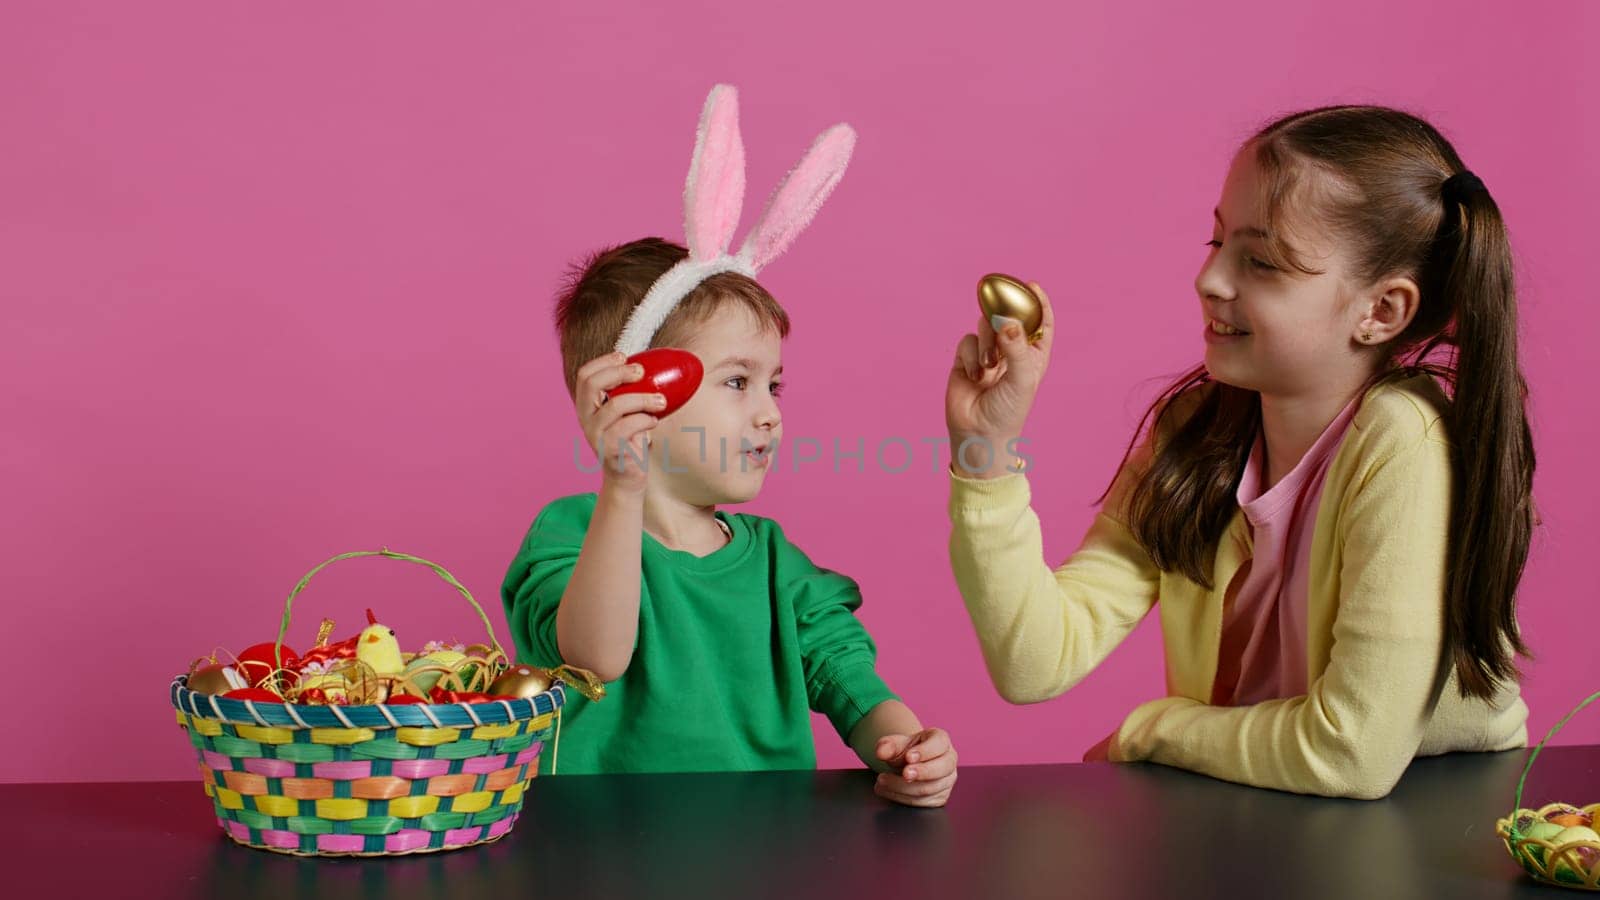 Sweet children knocking eggs together for easter tradition in studio, playing a seasonal holiday game against pink background. Lovely adorable kids having fun with festive decorations. Camera B.